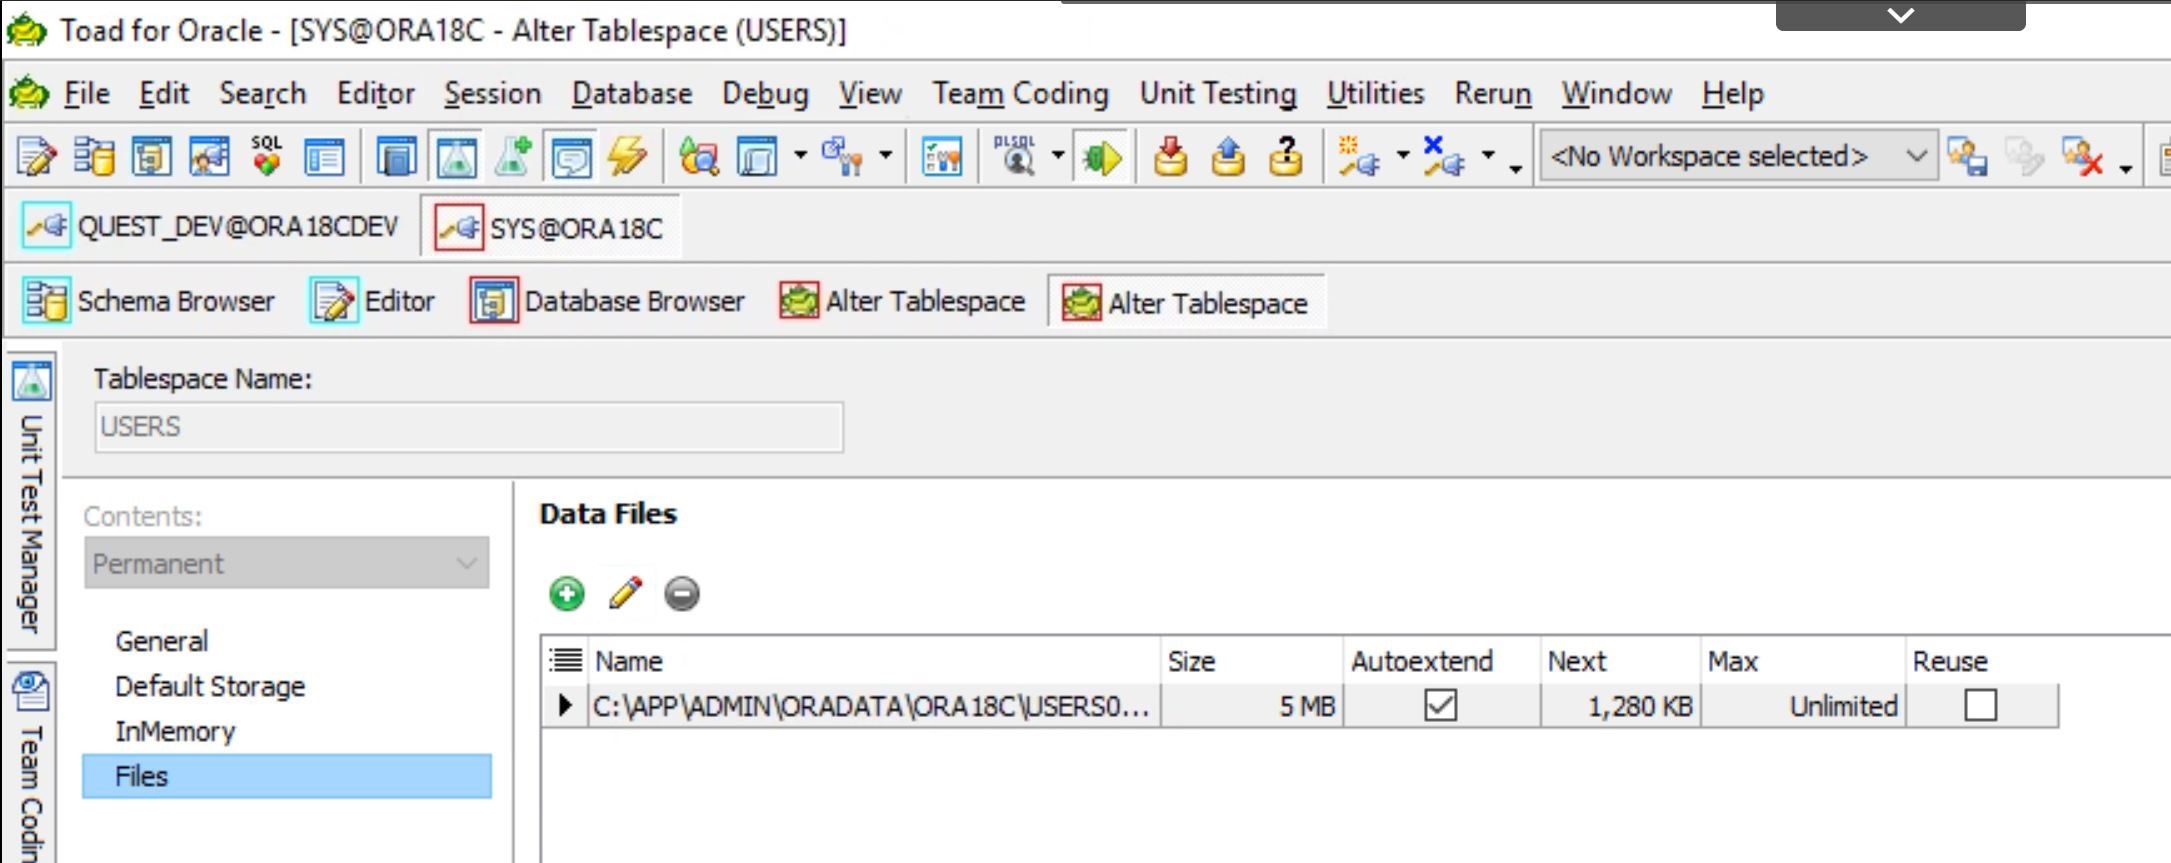 Toad for Oracle. Database Browser. Alter Tablespace’ allows you to view tablespace information in multiple fashion to help you drill down.